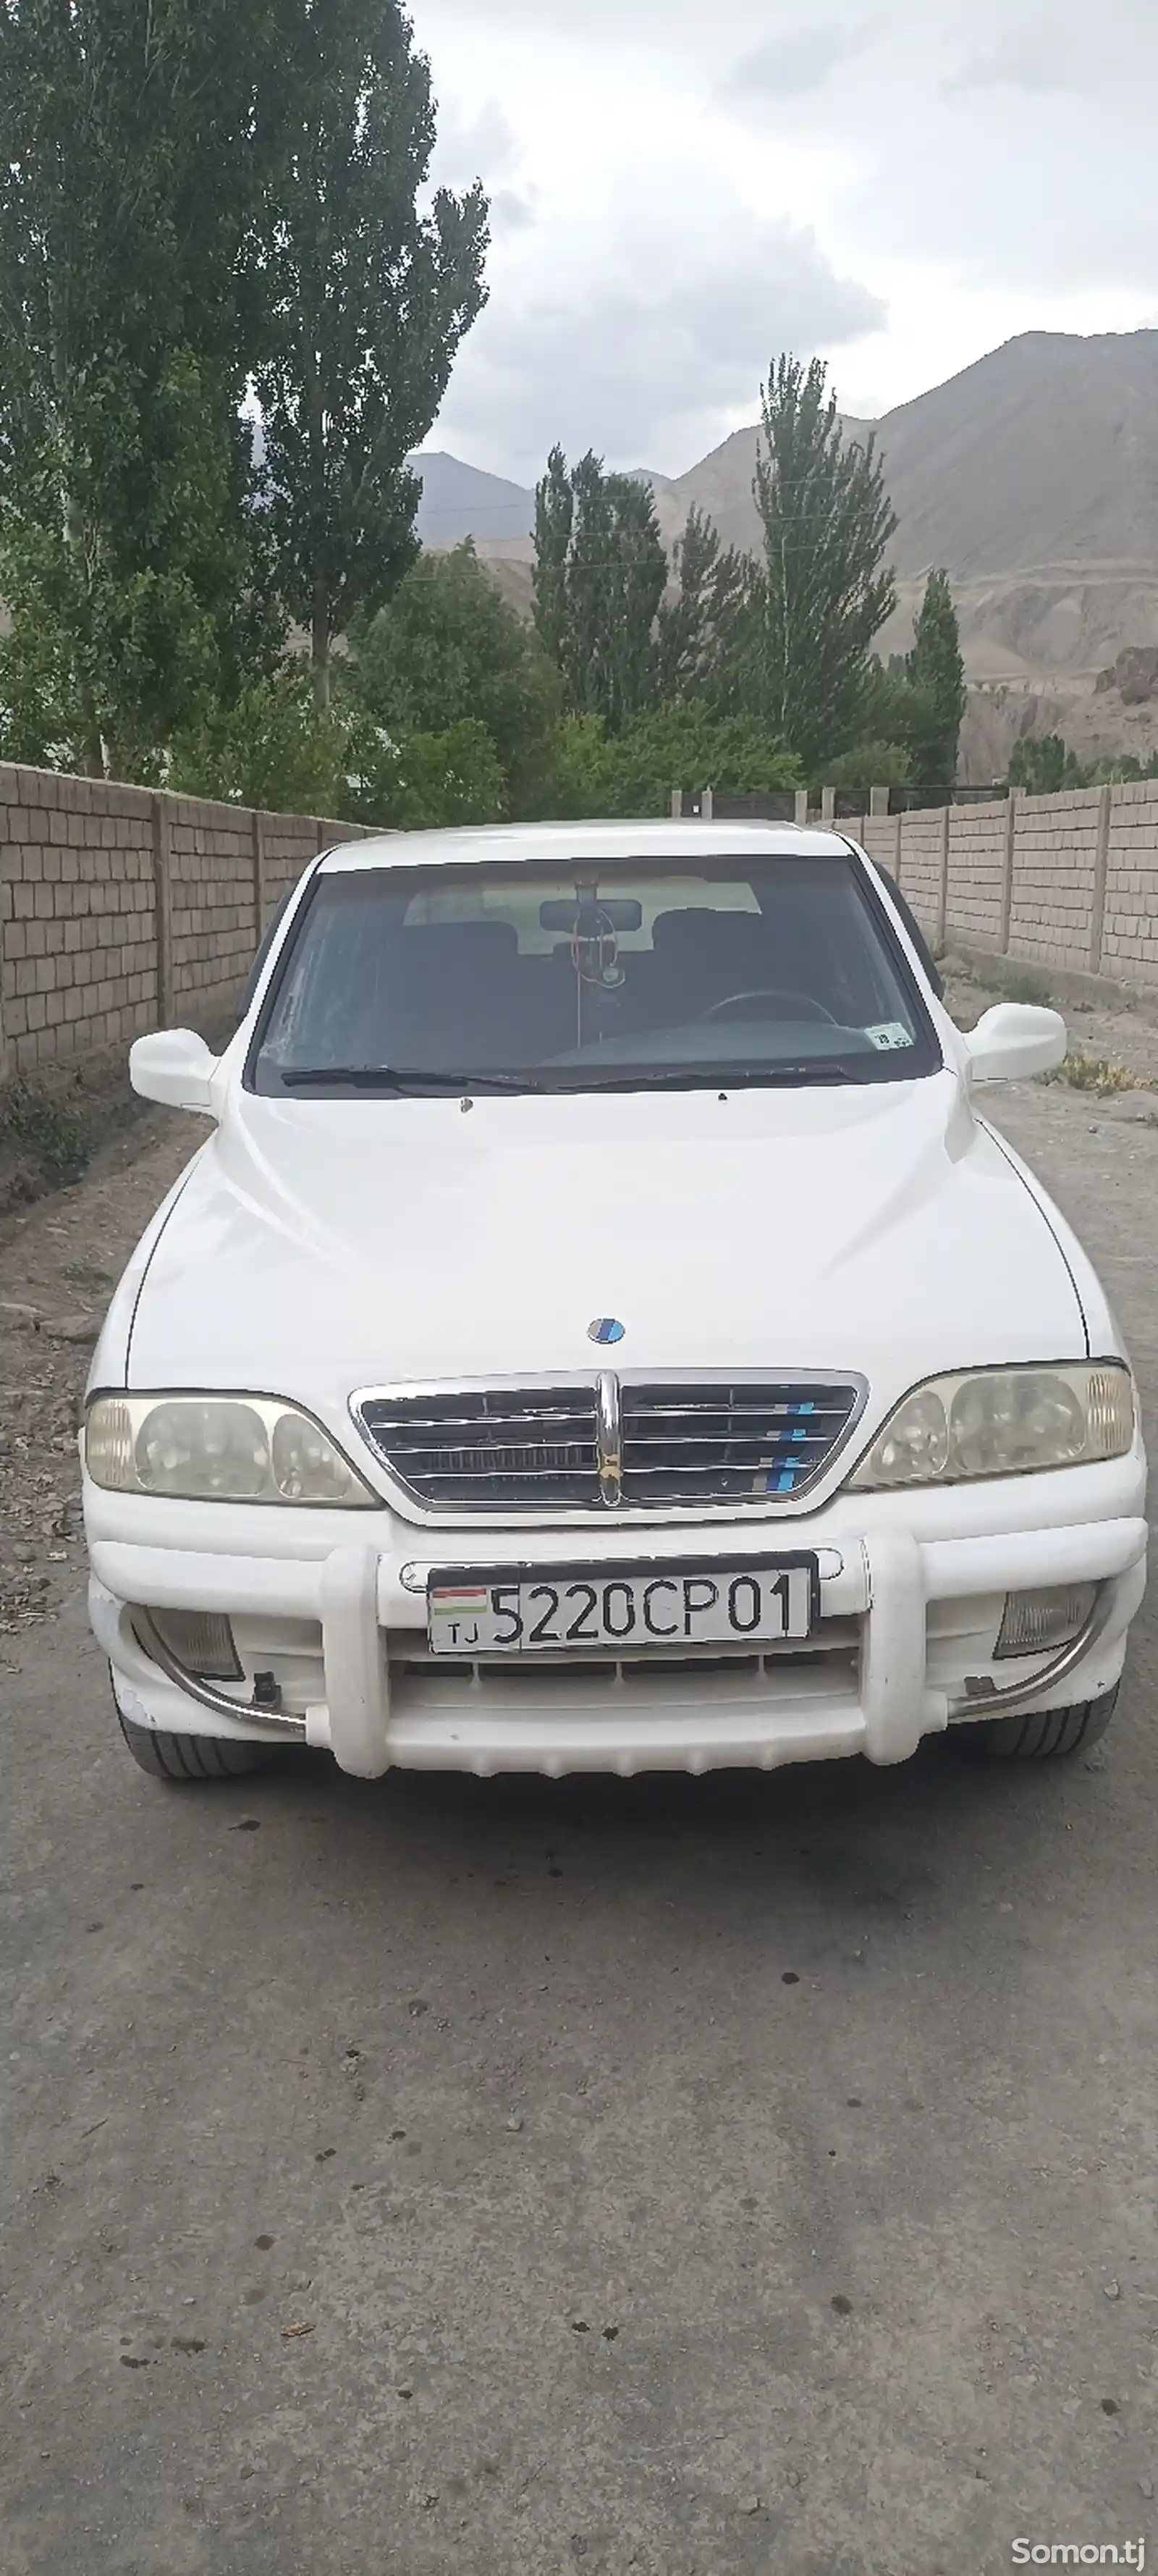 Ssang Yong Musso Sport, 2004-4